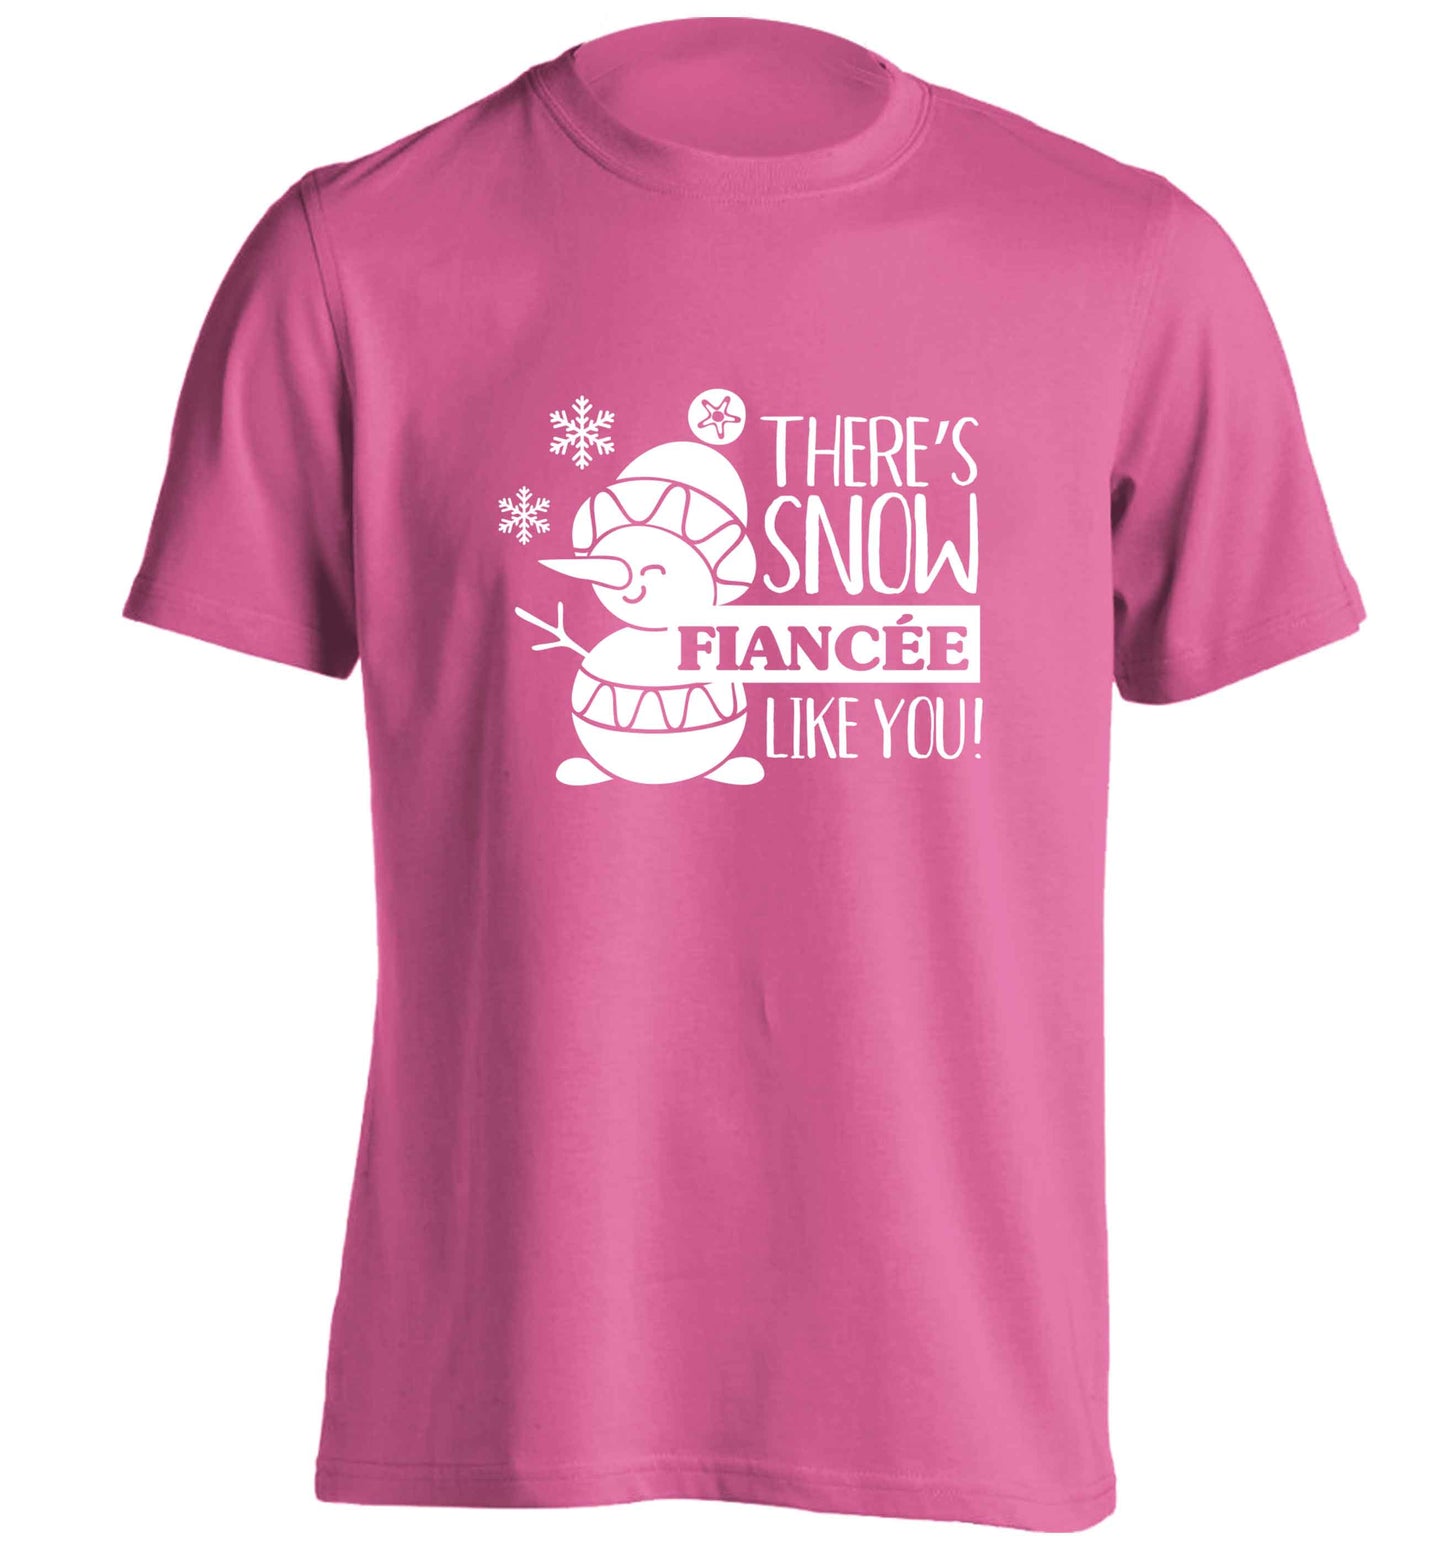 There's snow fiancee like you adults unisex pink Tshirt 2XL